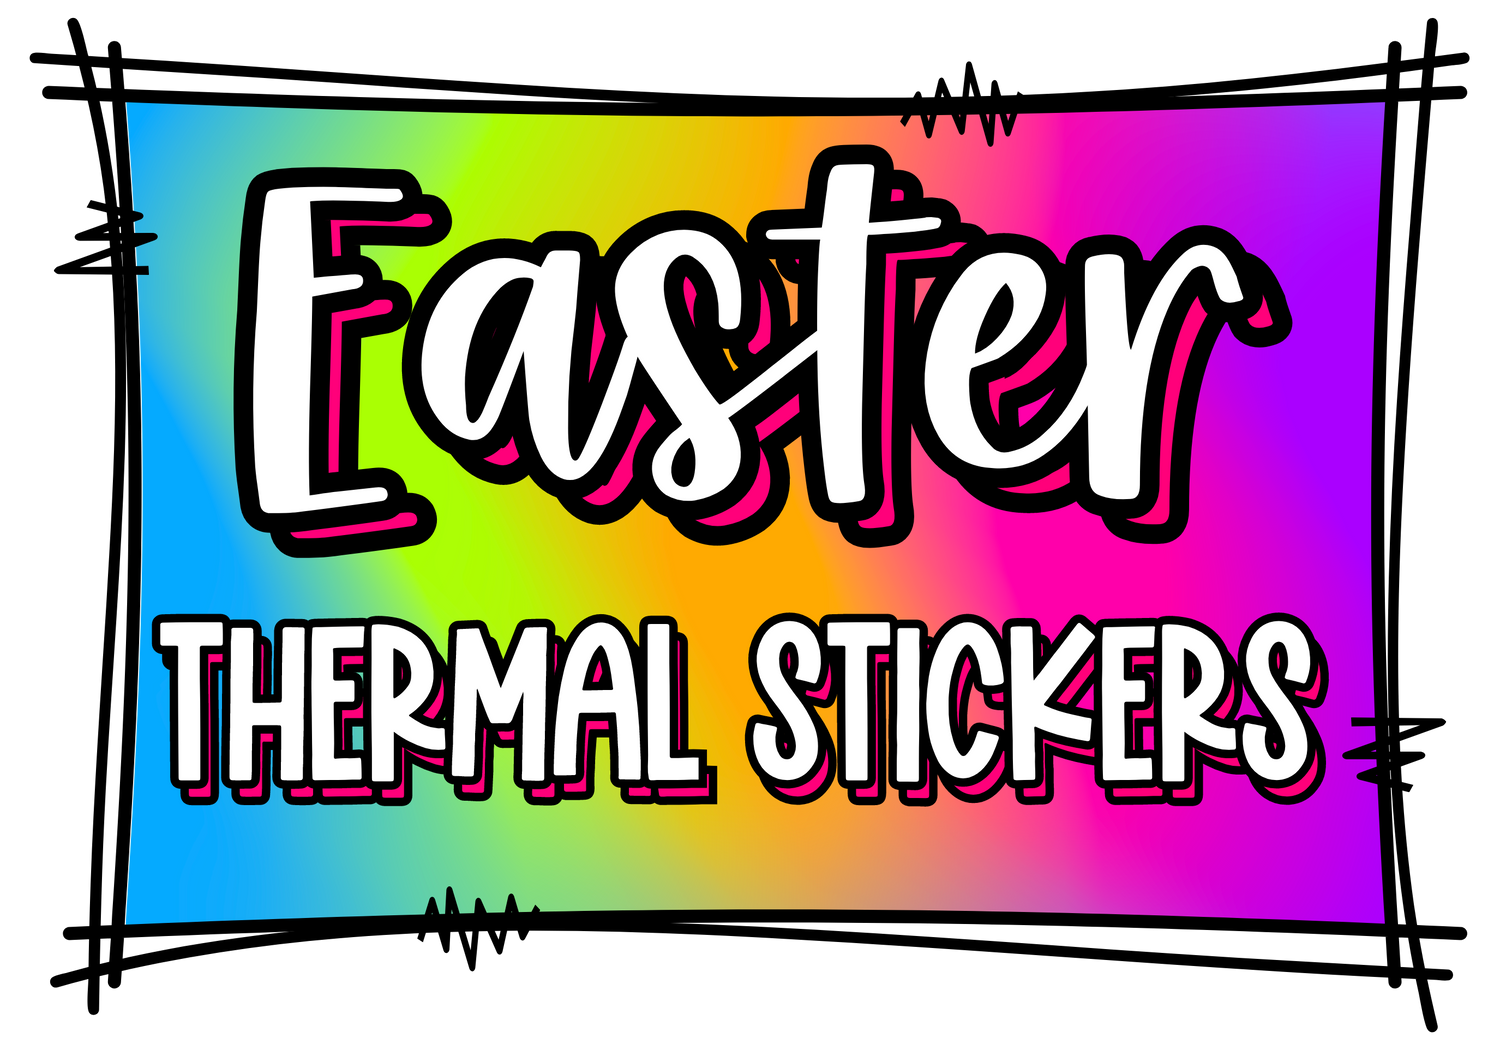 Easter Small Business Thermal Stickers